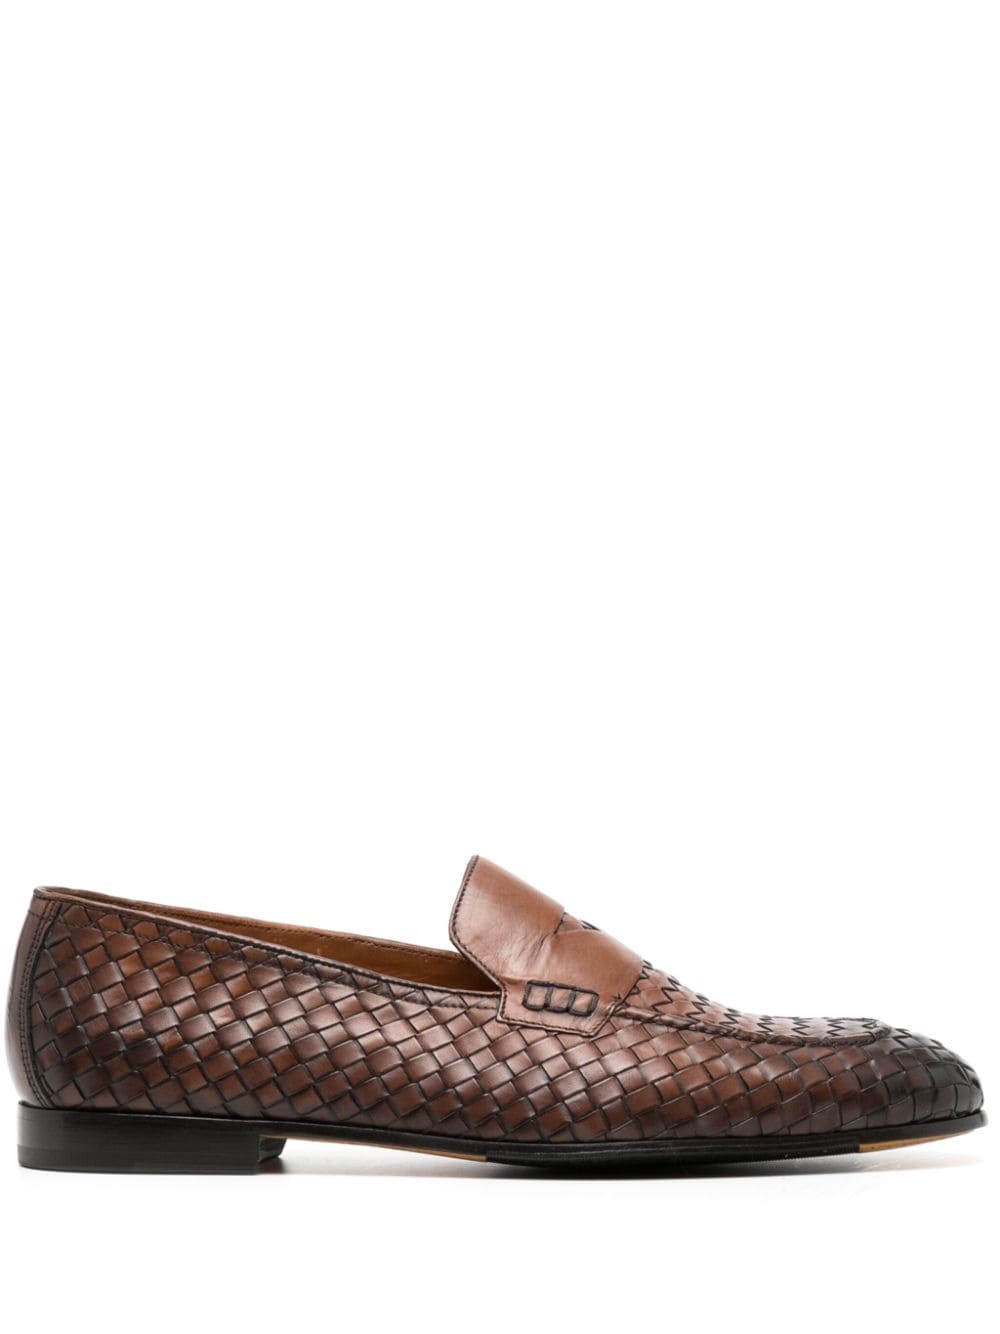 Doucal's woven leather penny loafers - Brown von Doucal's